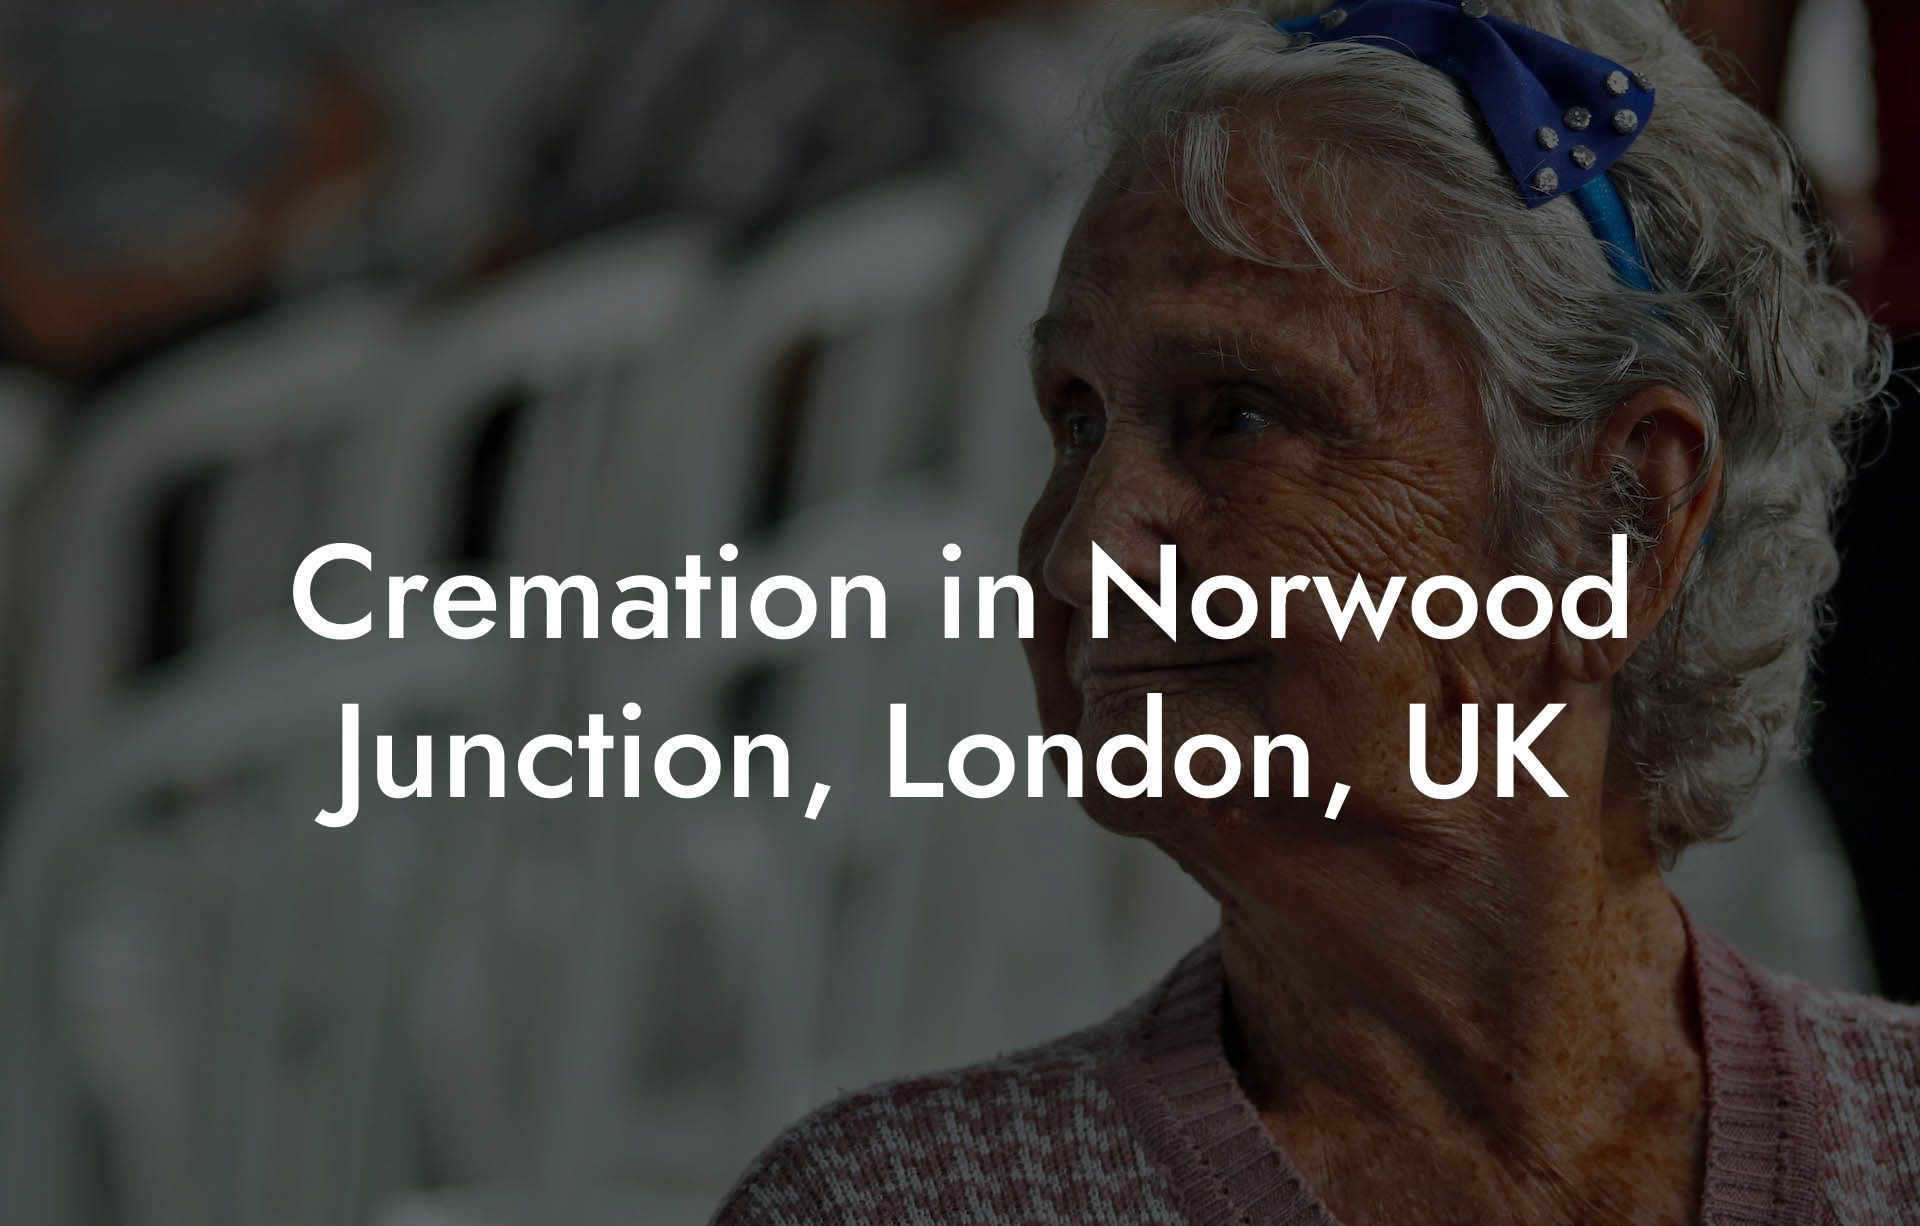 Cremation in Norwood Junction, London, UK